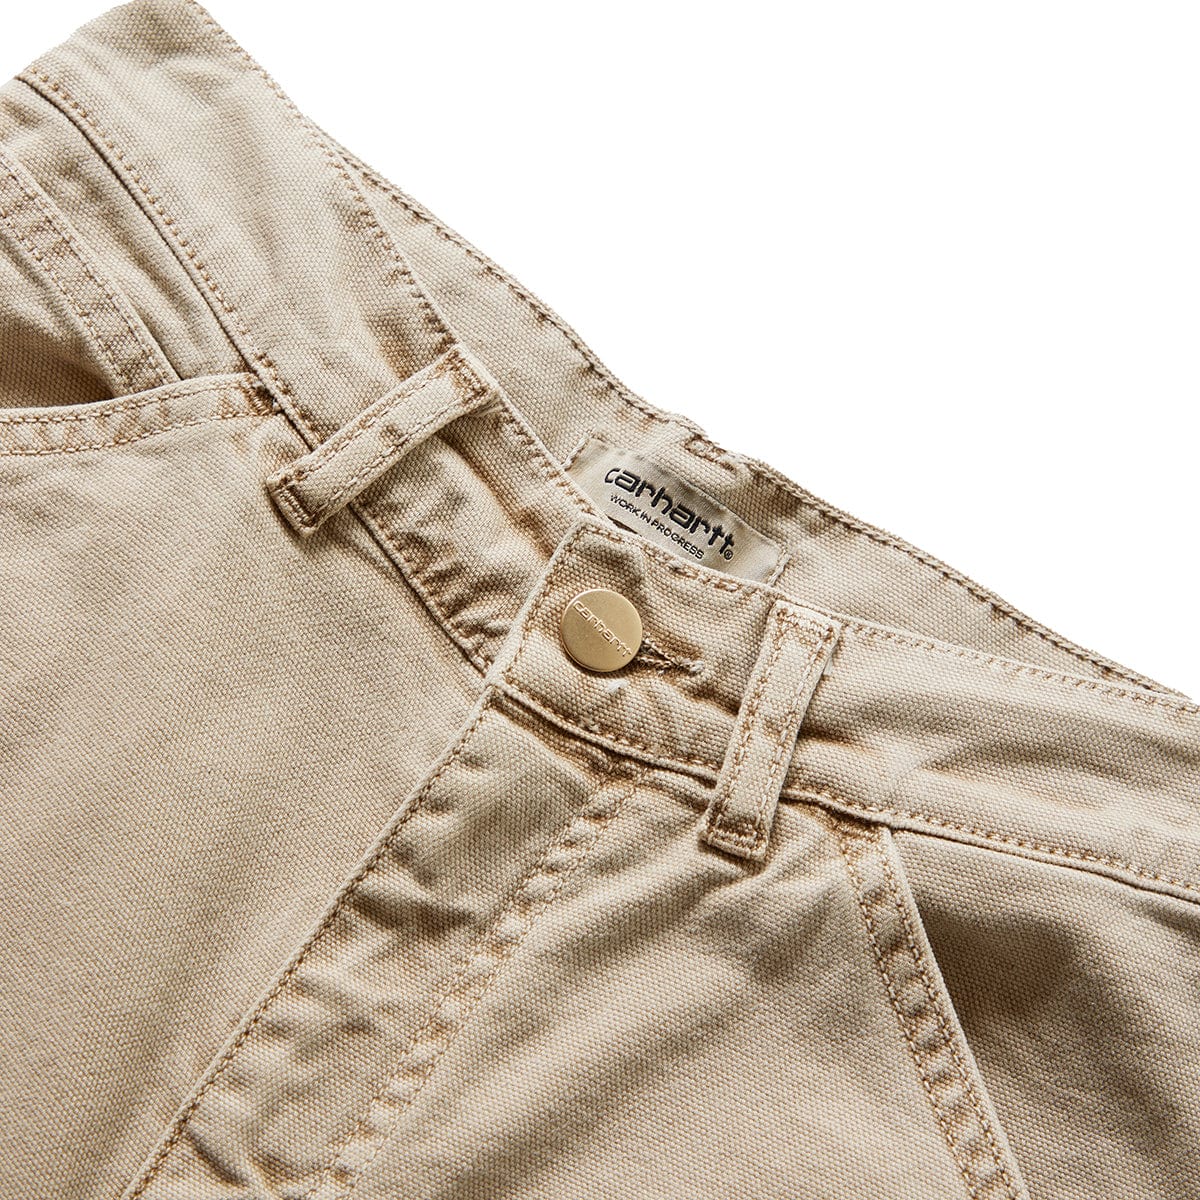 Pants and jeans Carhartt WIP W' Pierce Double Knee Pant Dusty H Brown Faded